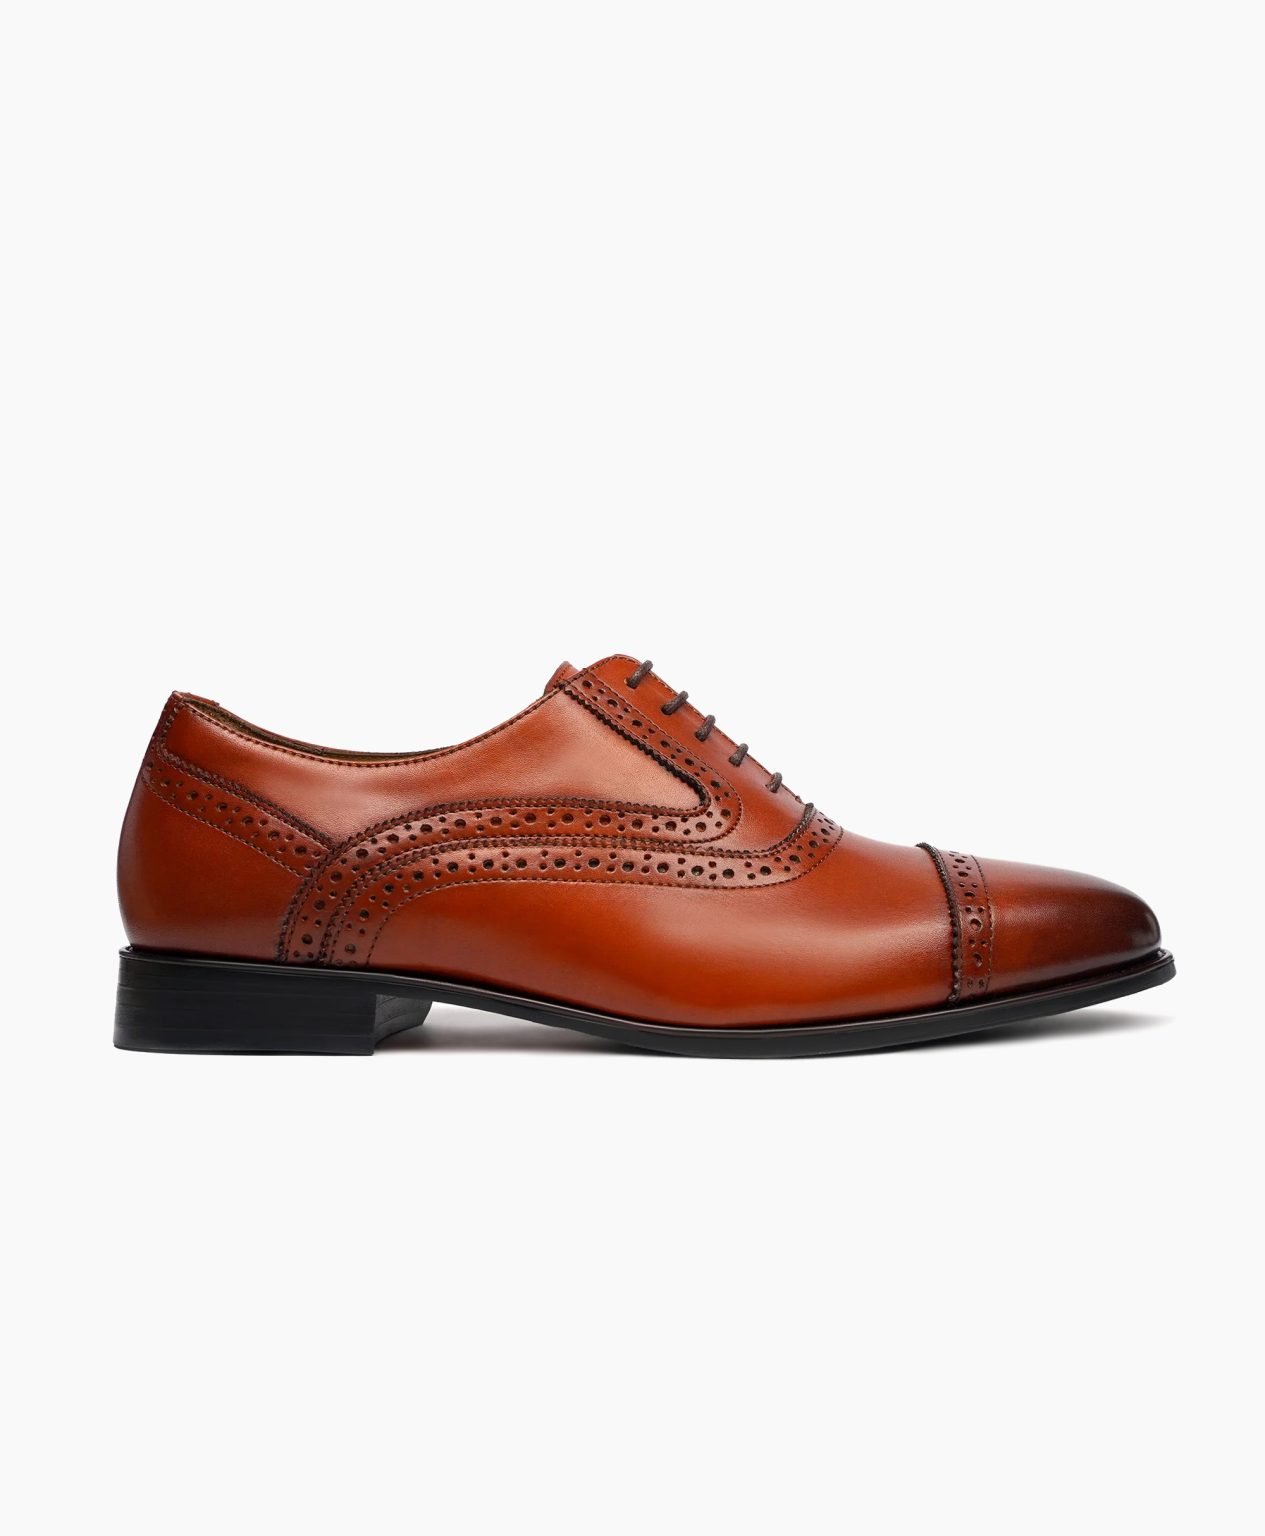 chester-oxford-tan-brown-leather-shoes-image201